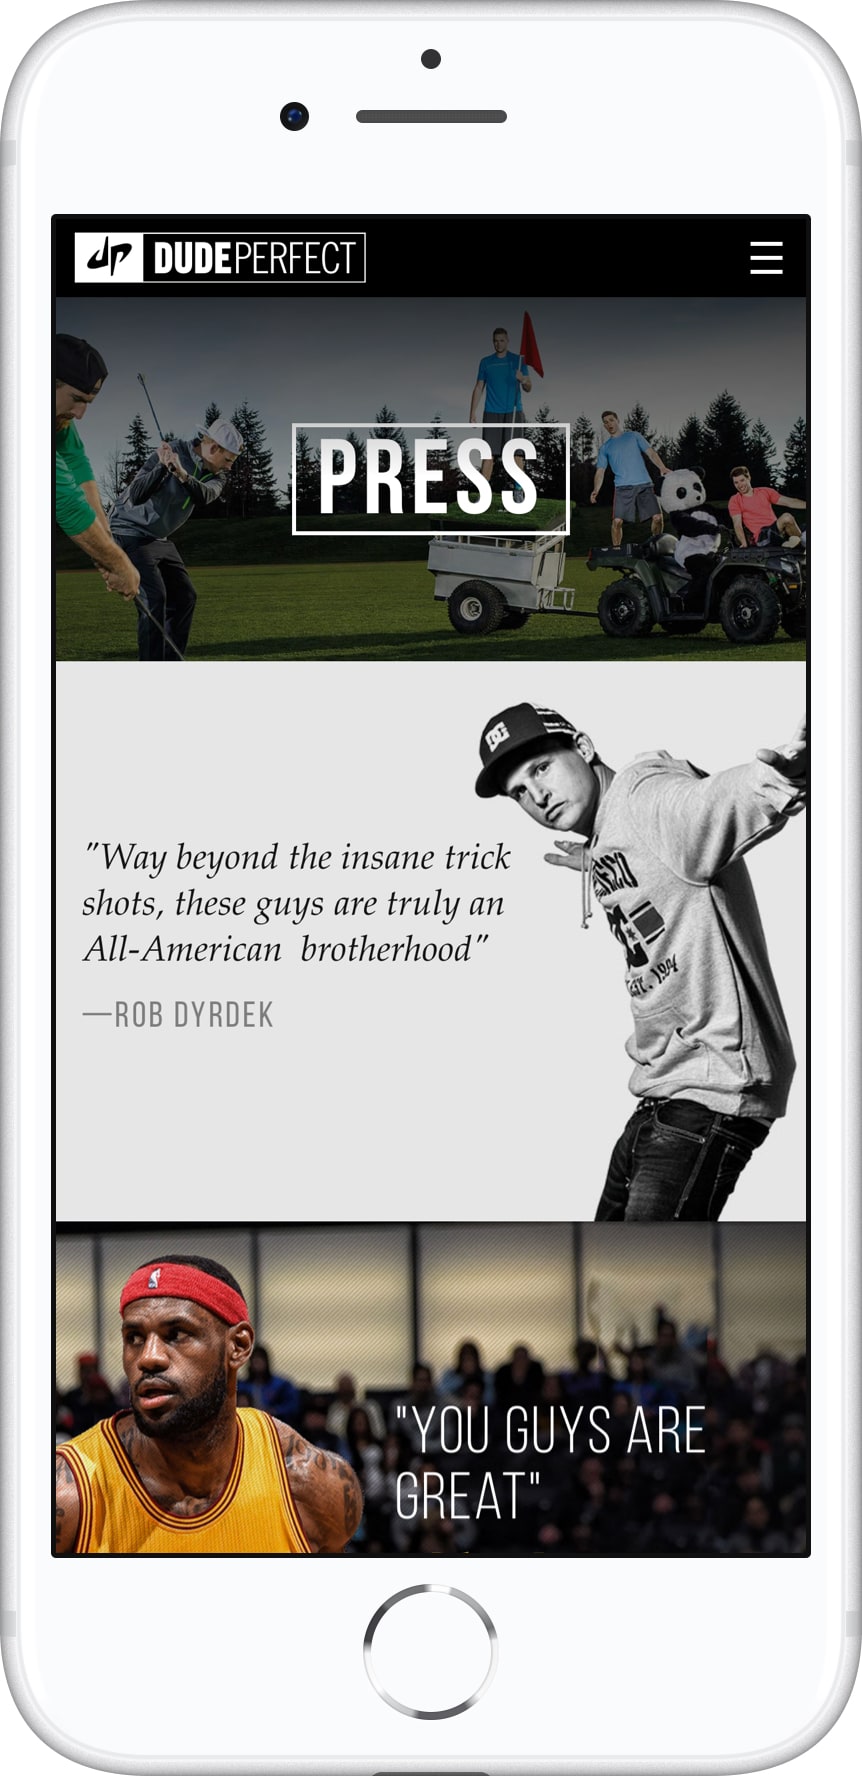 Mobile view of the Dude Perfect press page